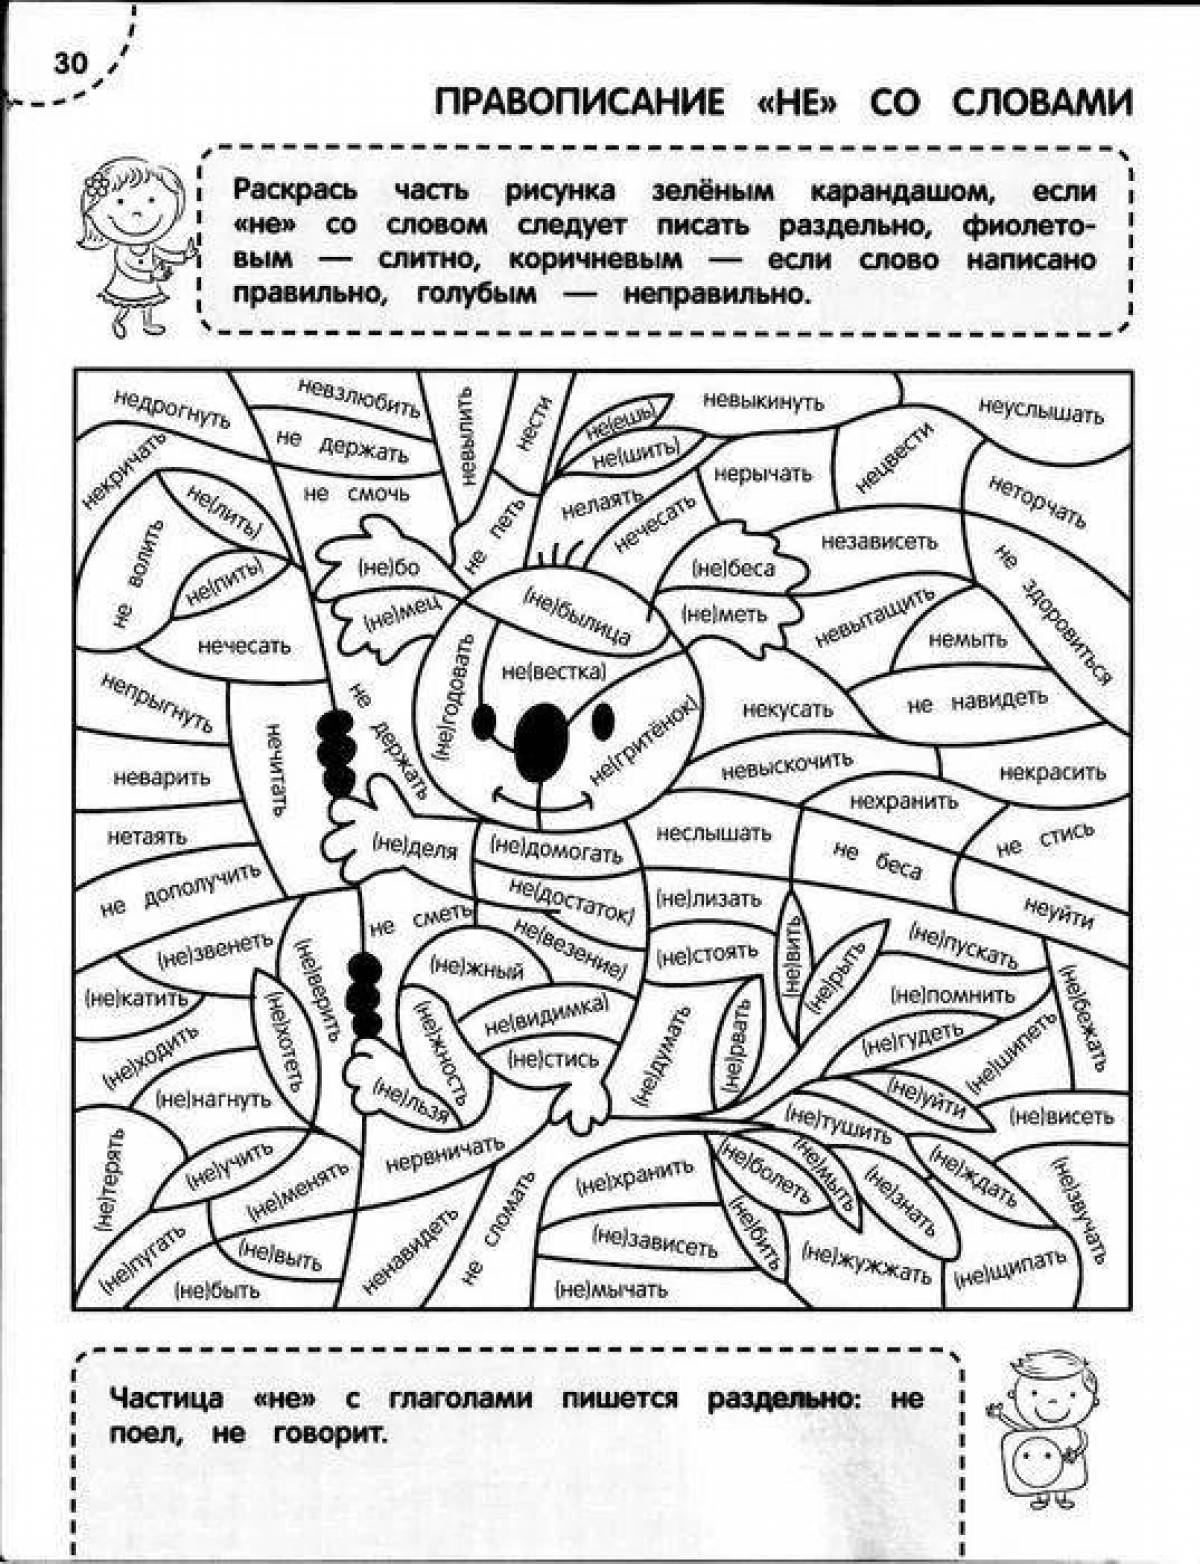 Color-explosive dictionary word coloring page